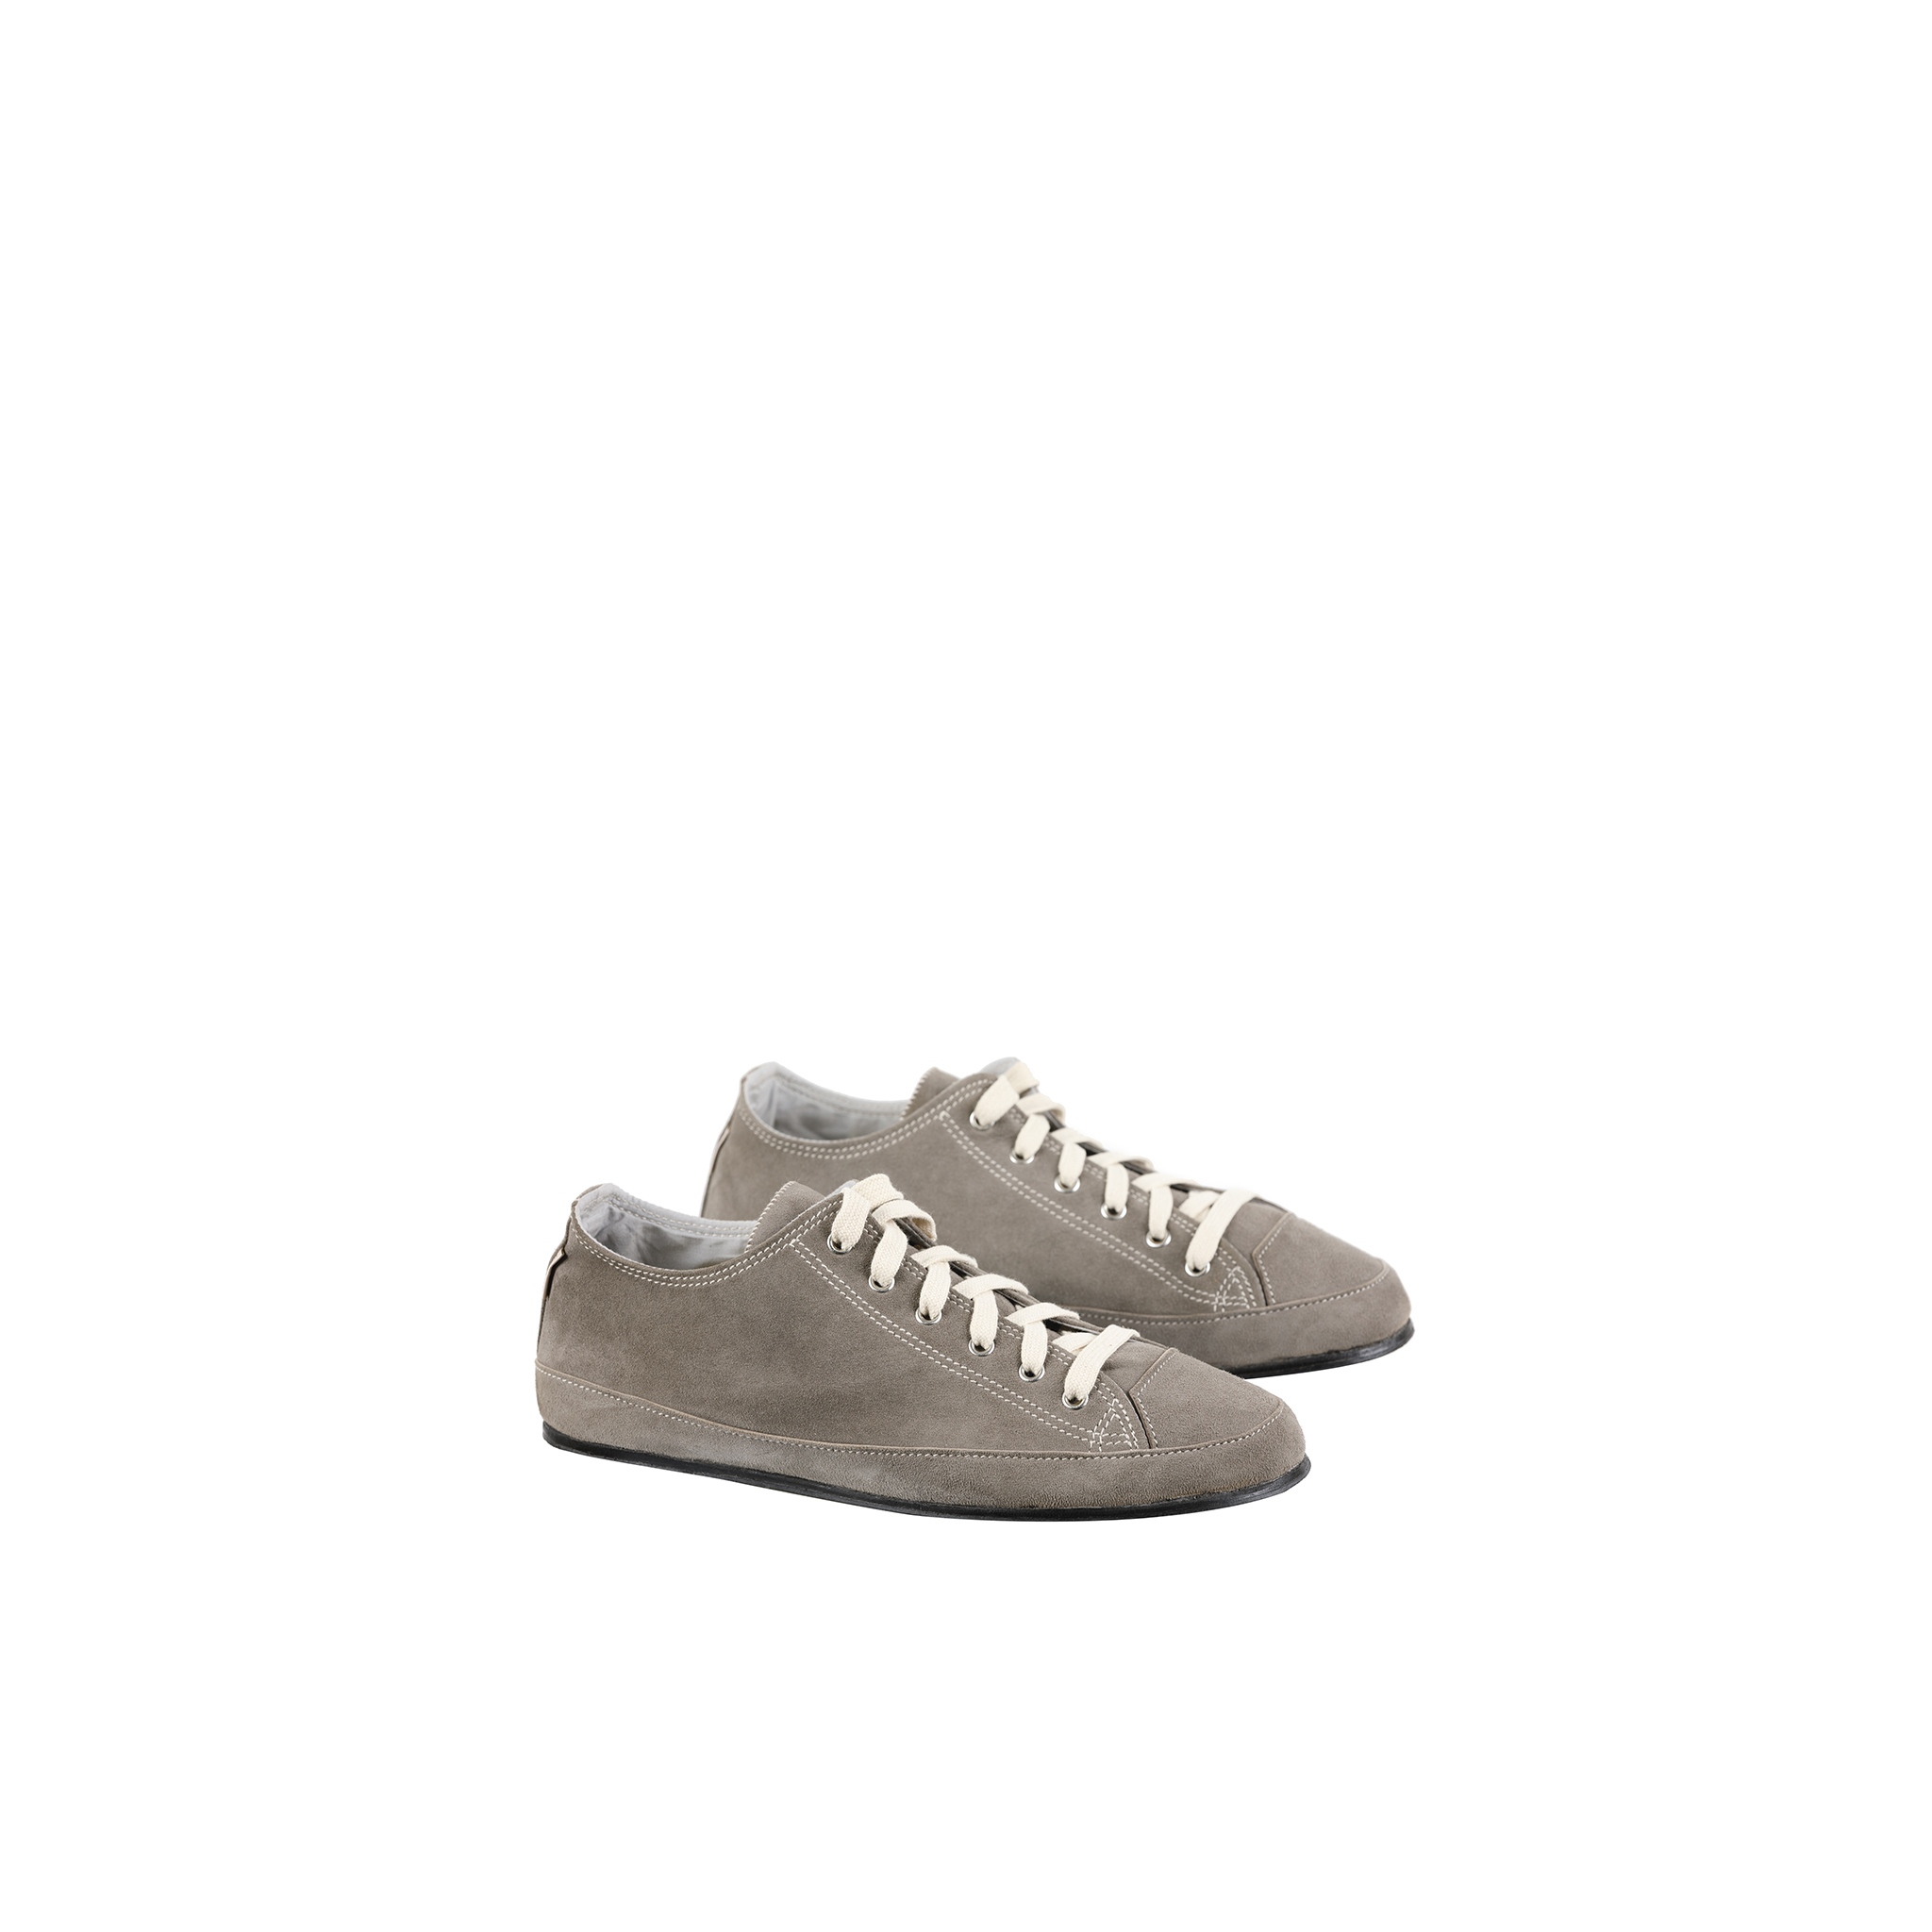 Low Sneakers - Suede leather - Grey color